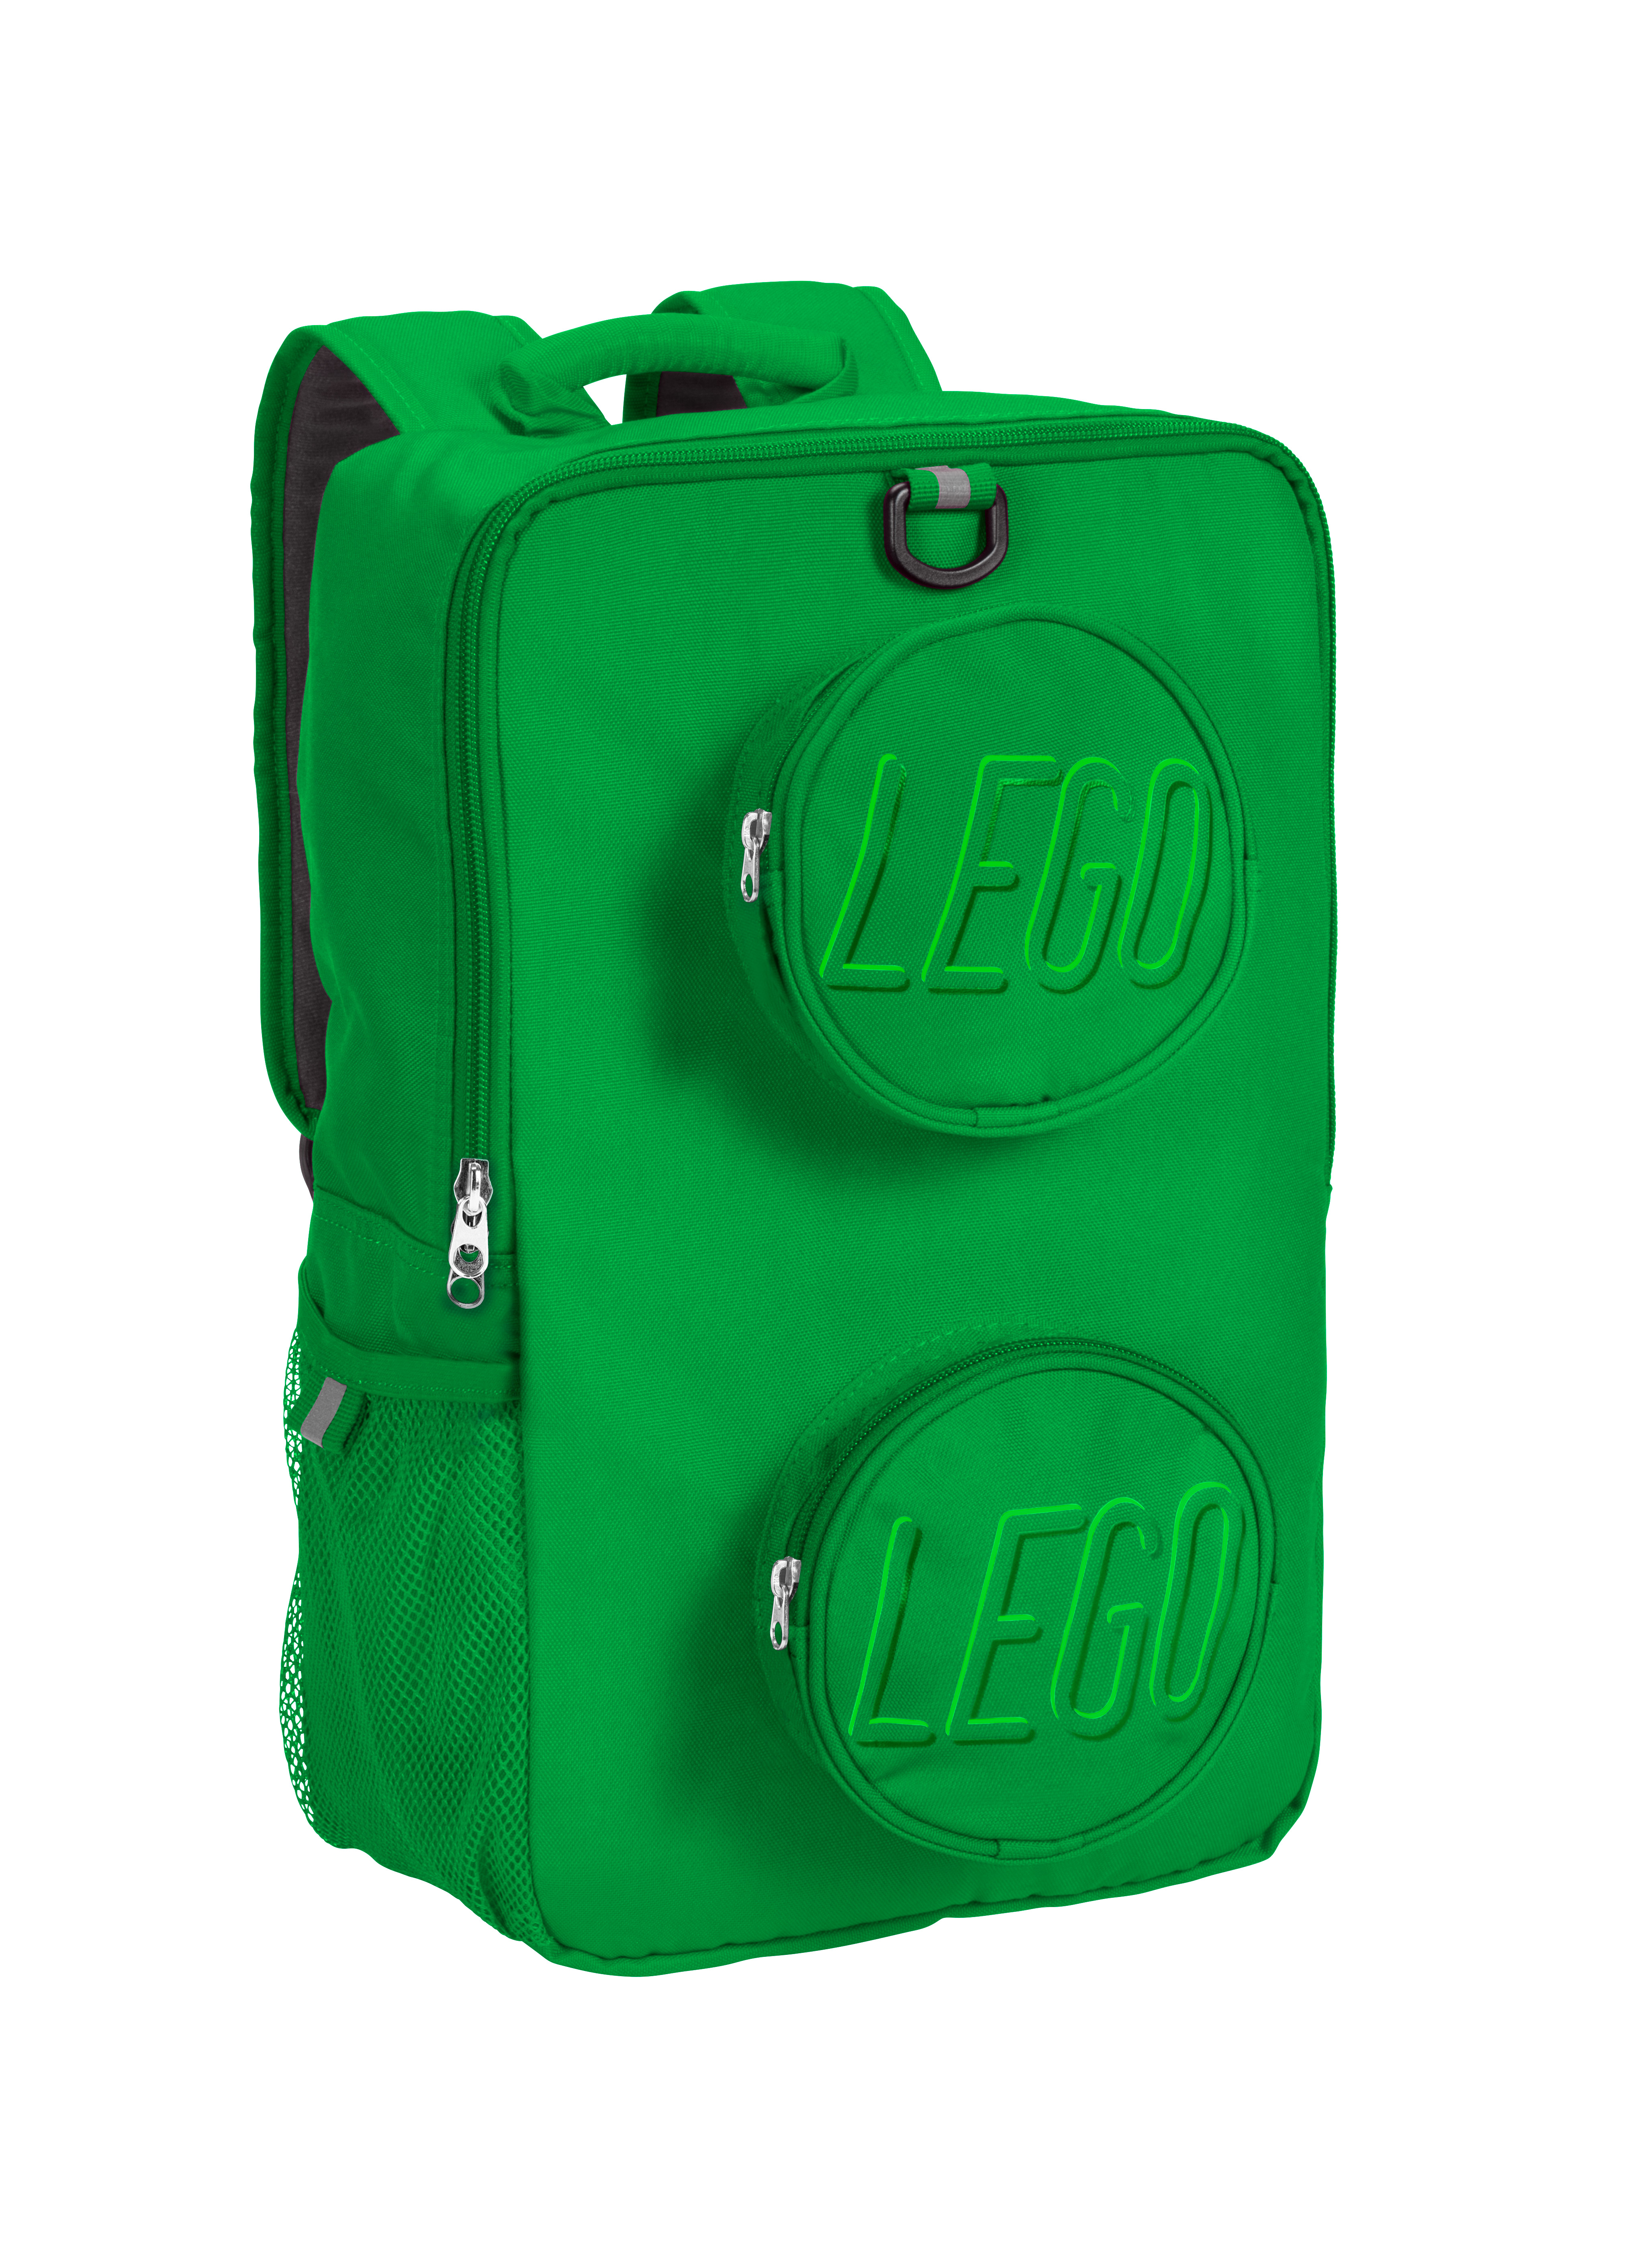 natuurpark Voorouder Reis LEGO® Brick Backpack – Green 5005525 | Other | Buy online at the Official  LEGO® Shop US